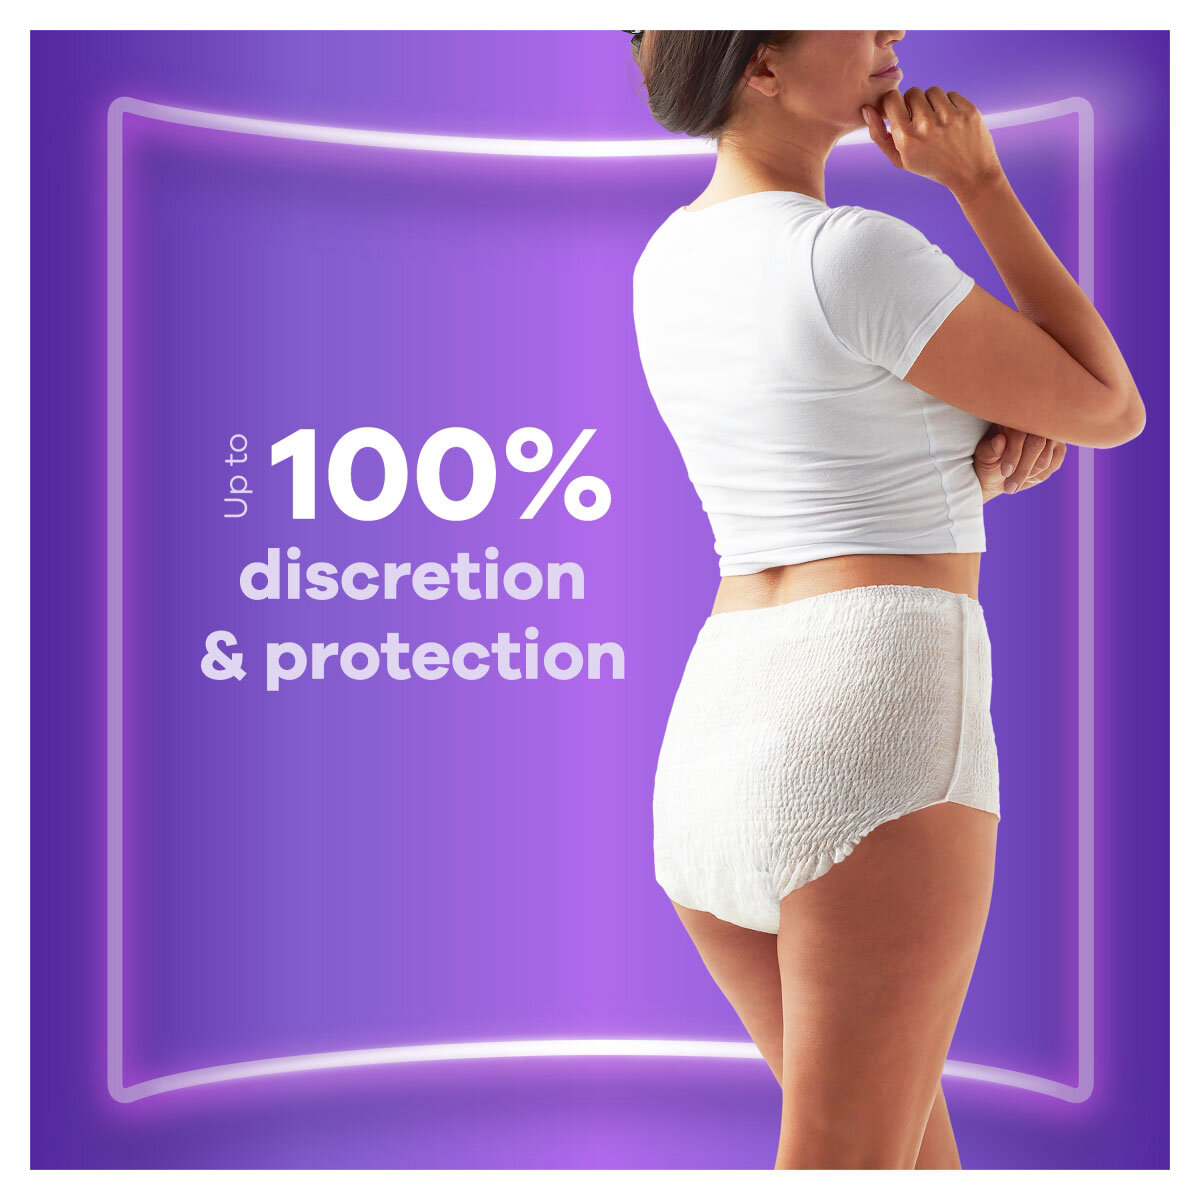 100% discretion and protection